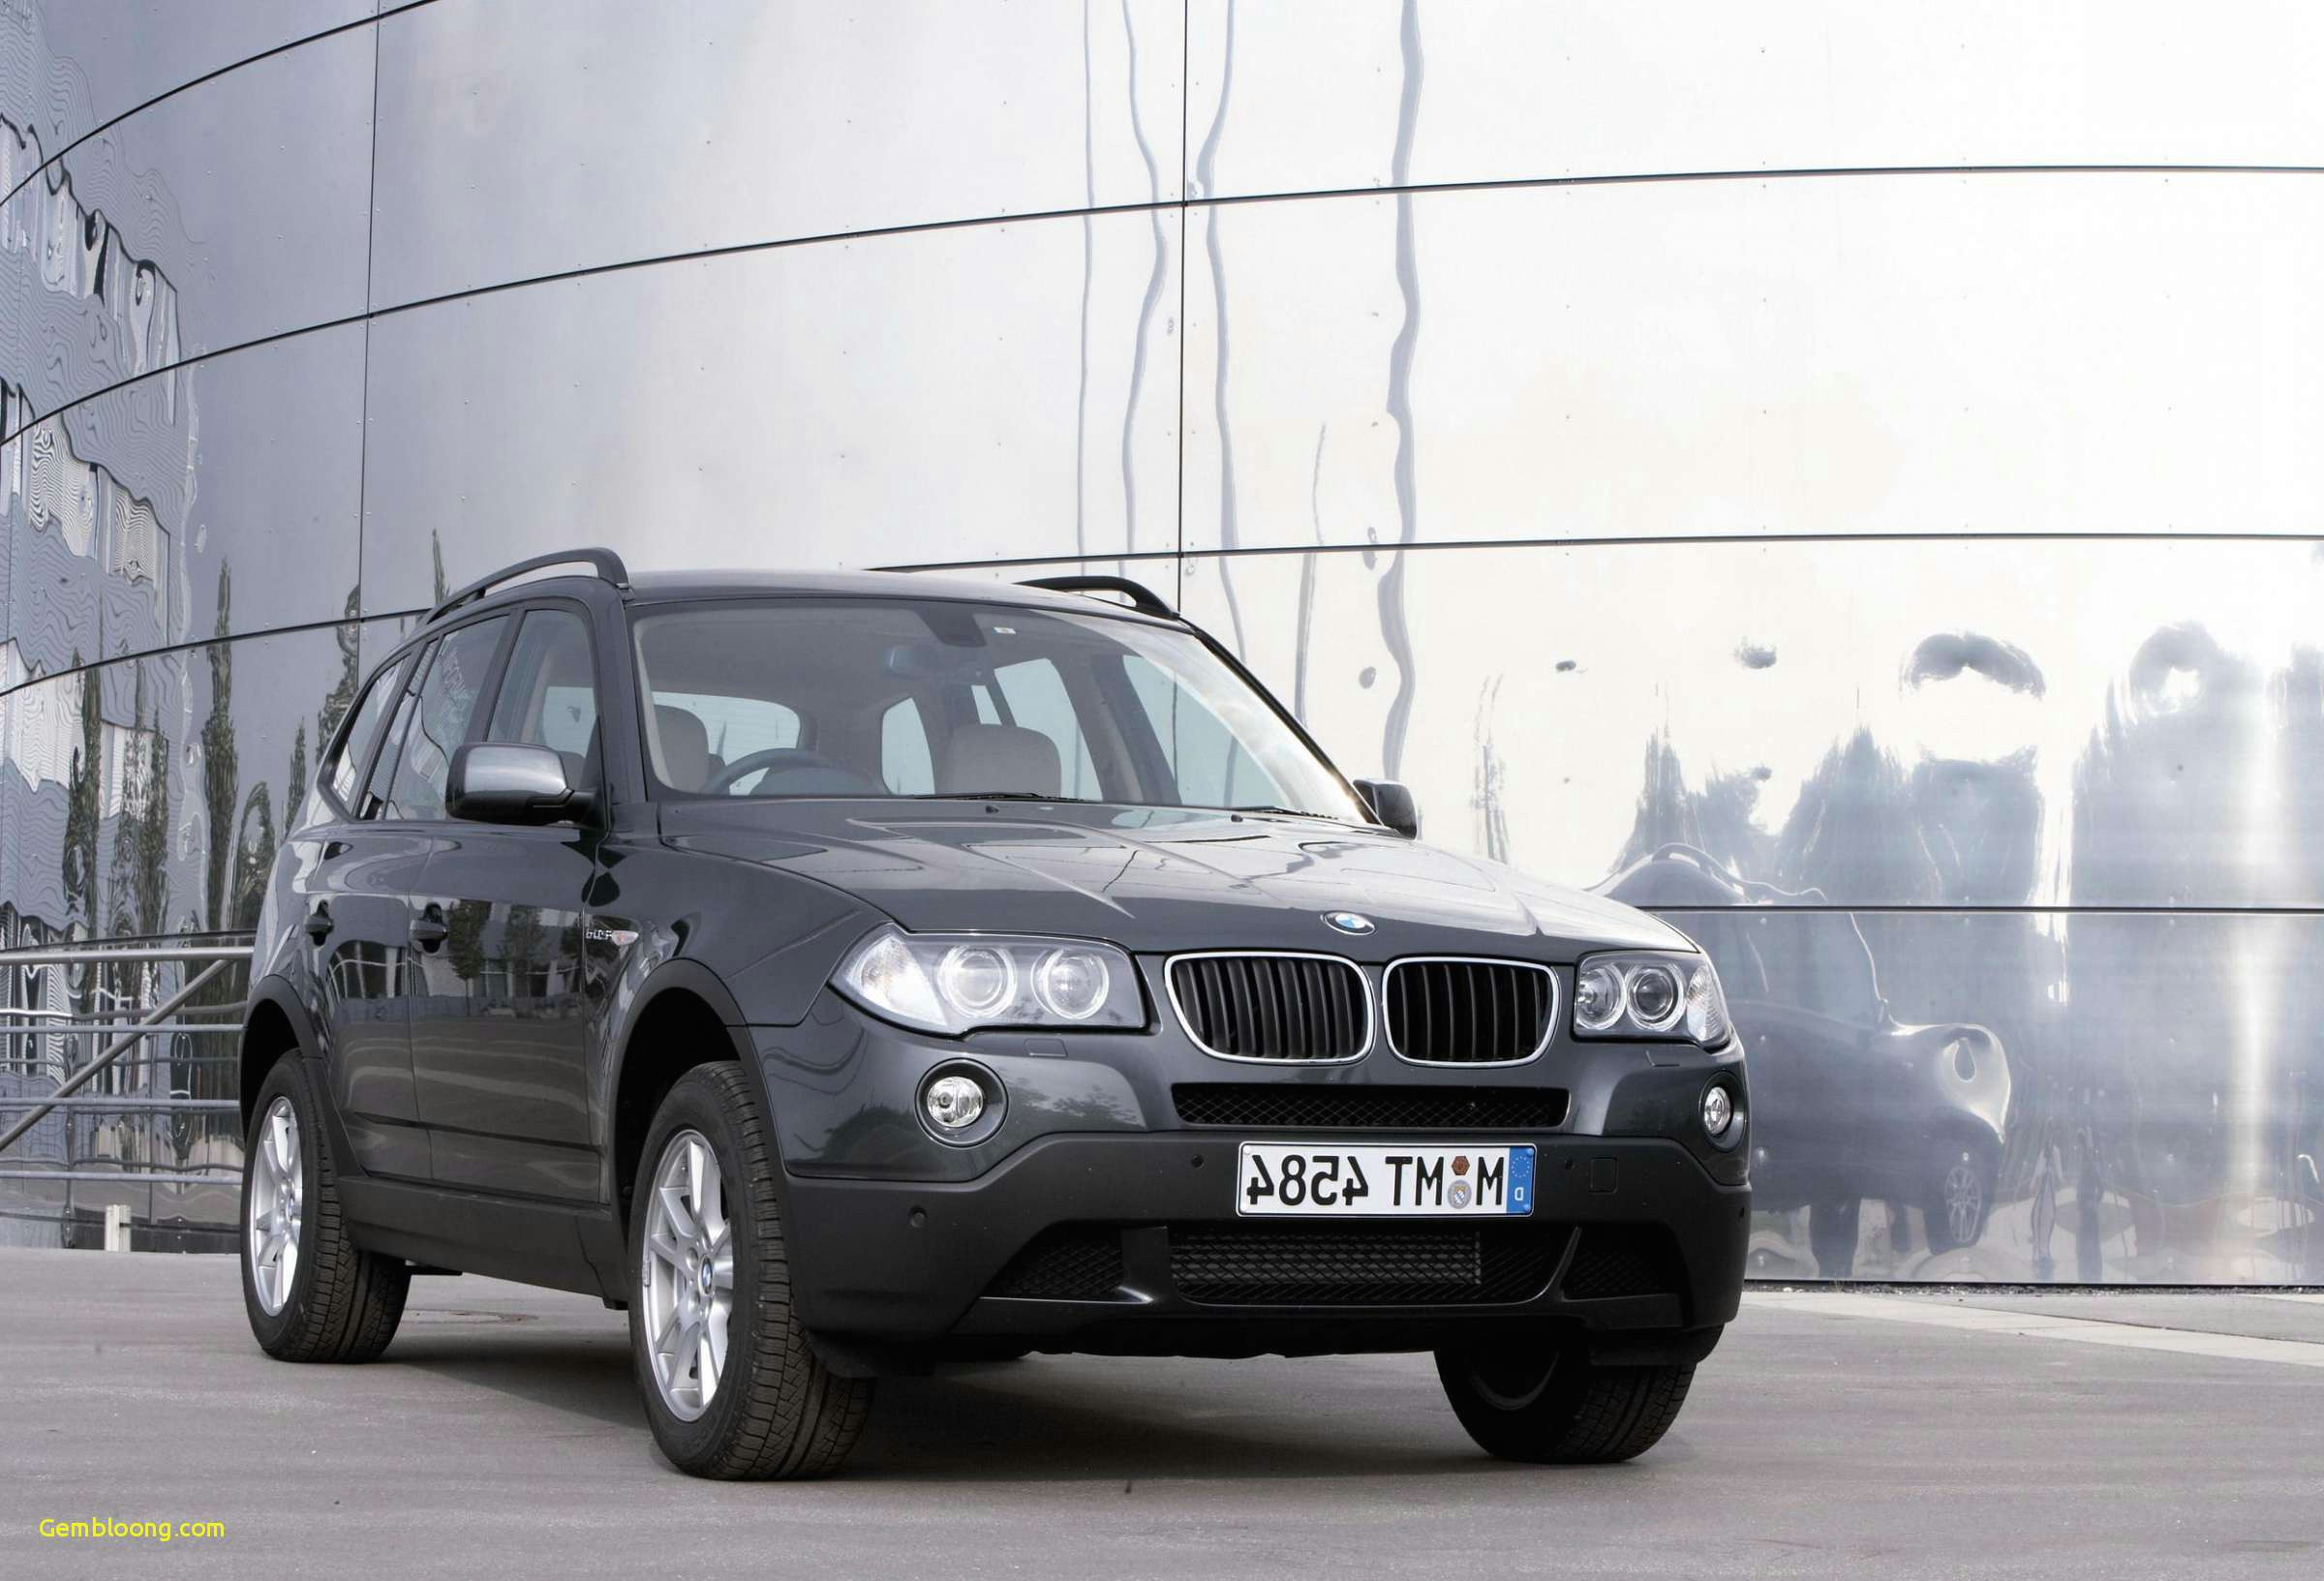 cars that are easy to draw top bmw i5 specs 2008 bmw x3 2 0d new